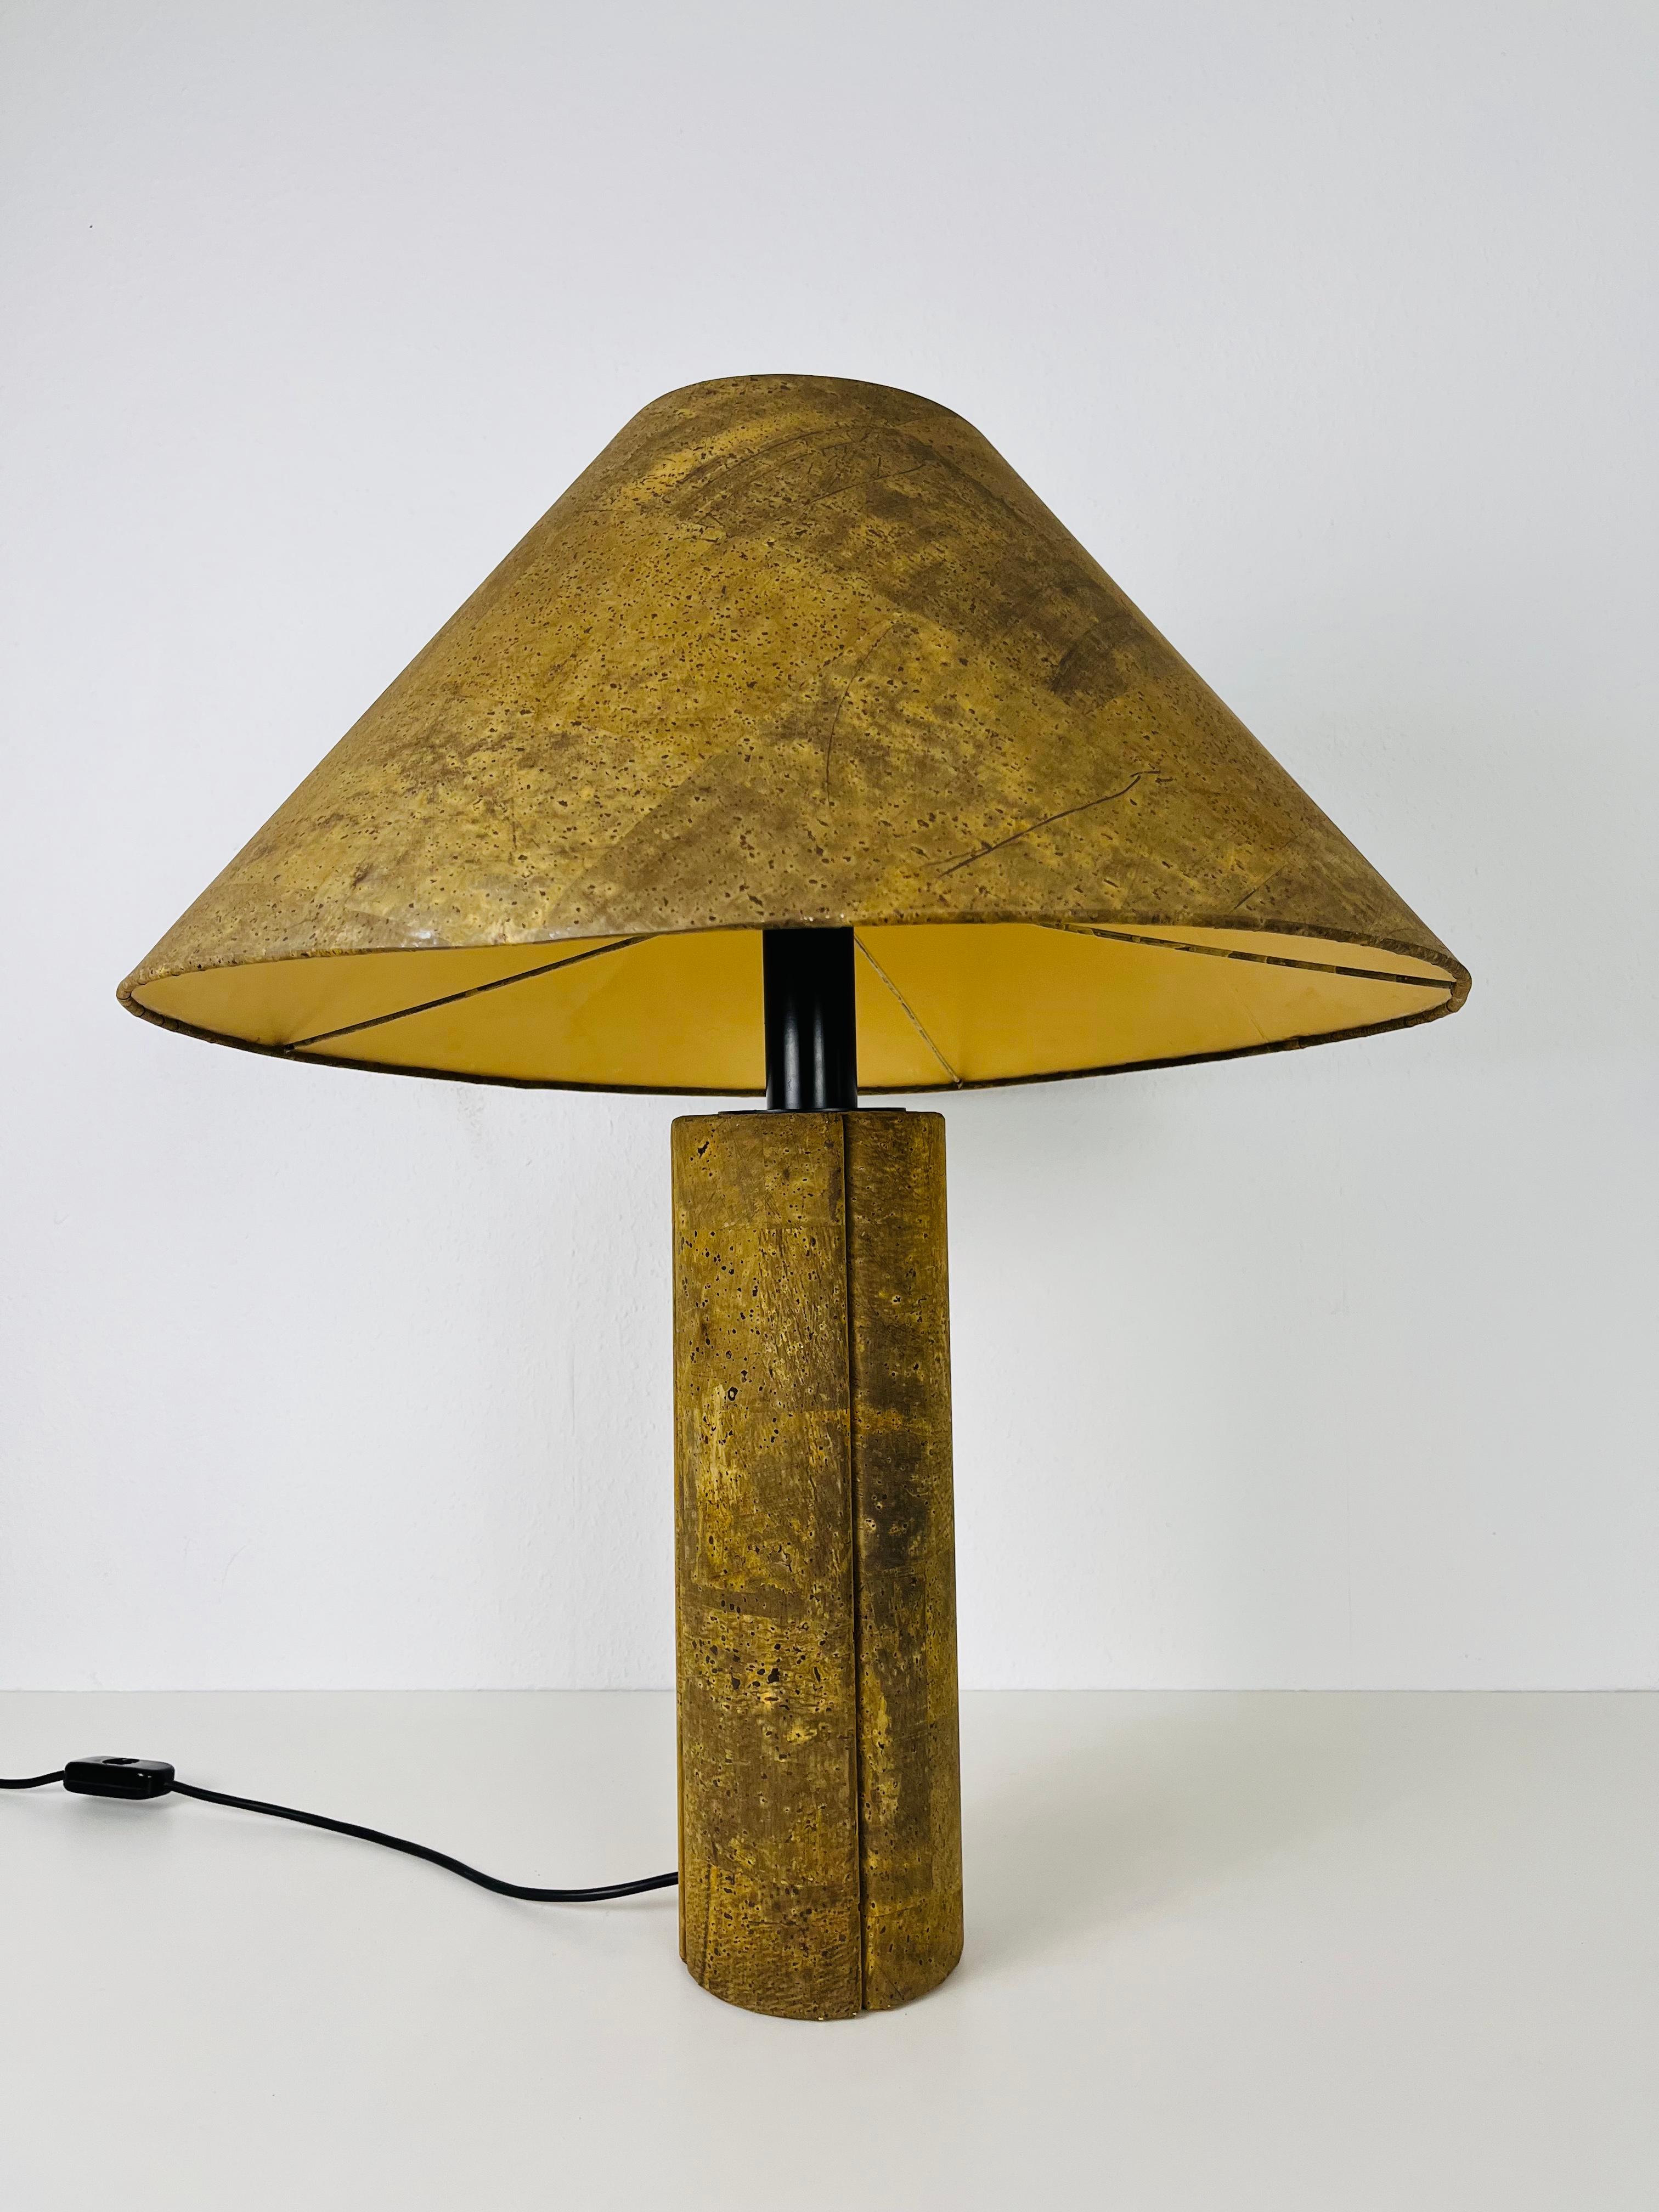 Cork Table Lamp by Ingo Maurer for M Design, 1960s, Germany 1